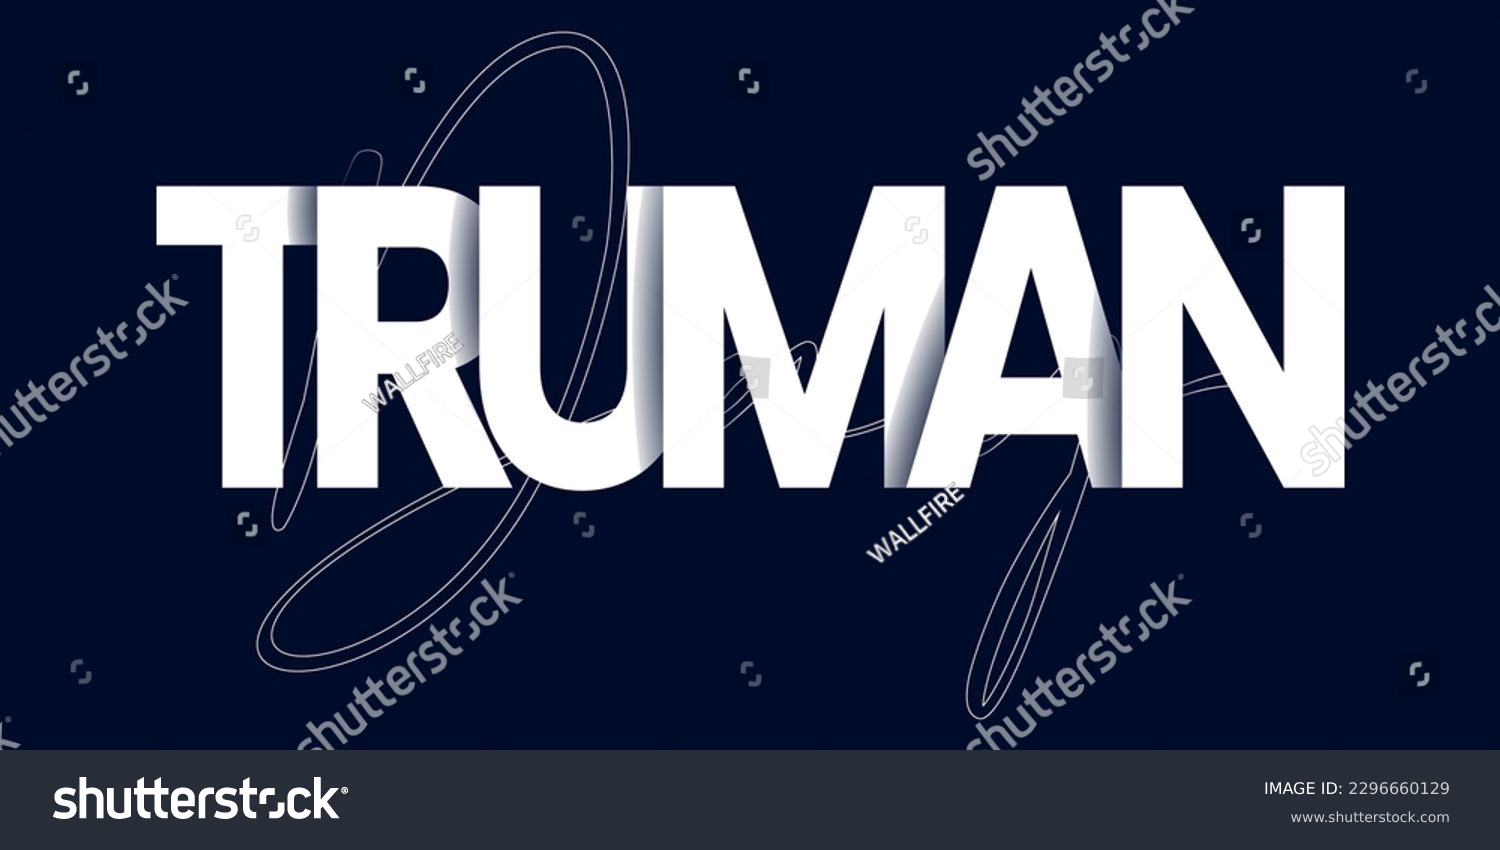 SVG of Vector illustration of Truman Day. Truman Day Holiday Truman Day is a state holiday in Missouri, the United States, on or around May 8 each year. svg